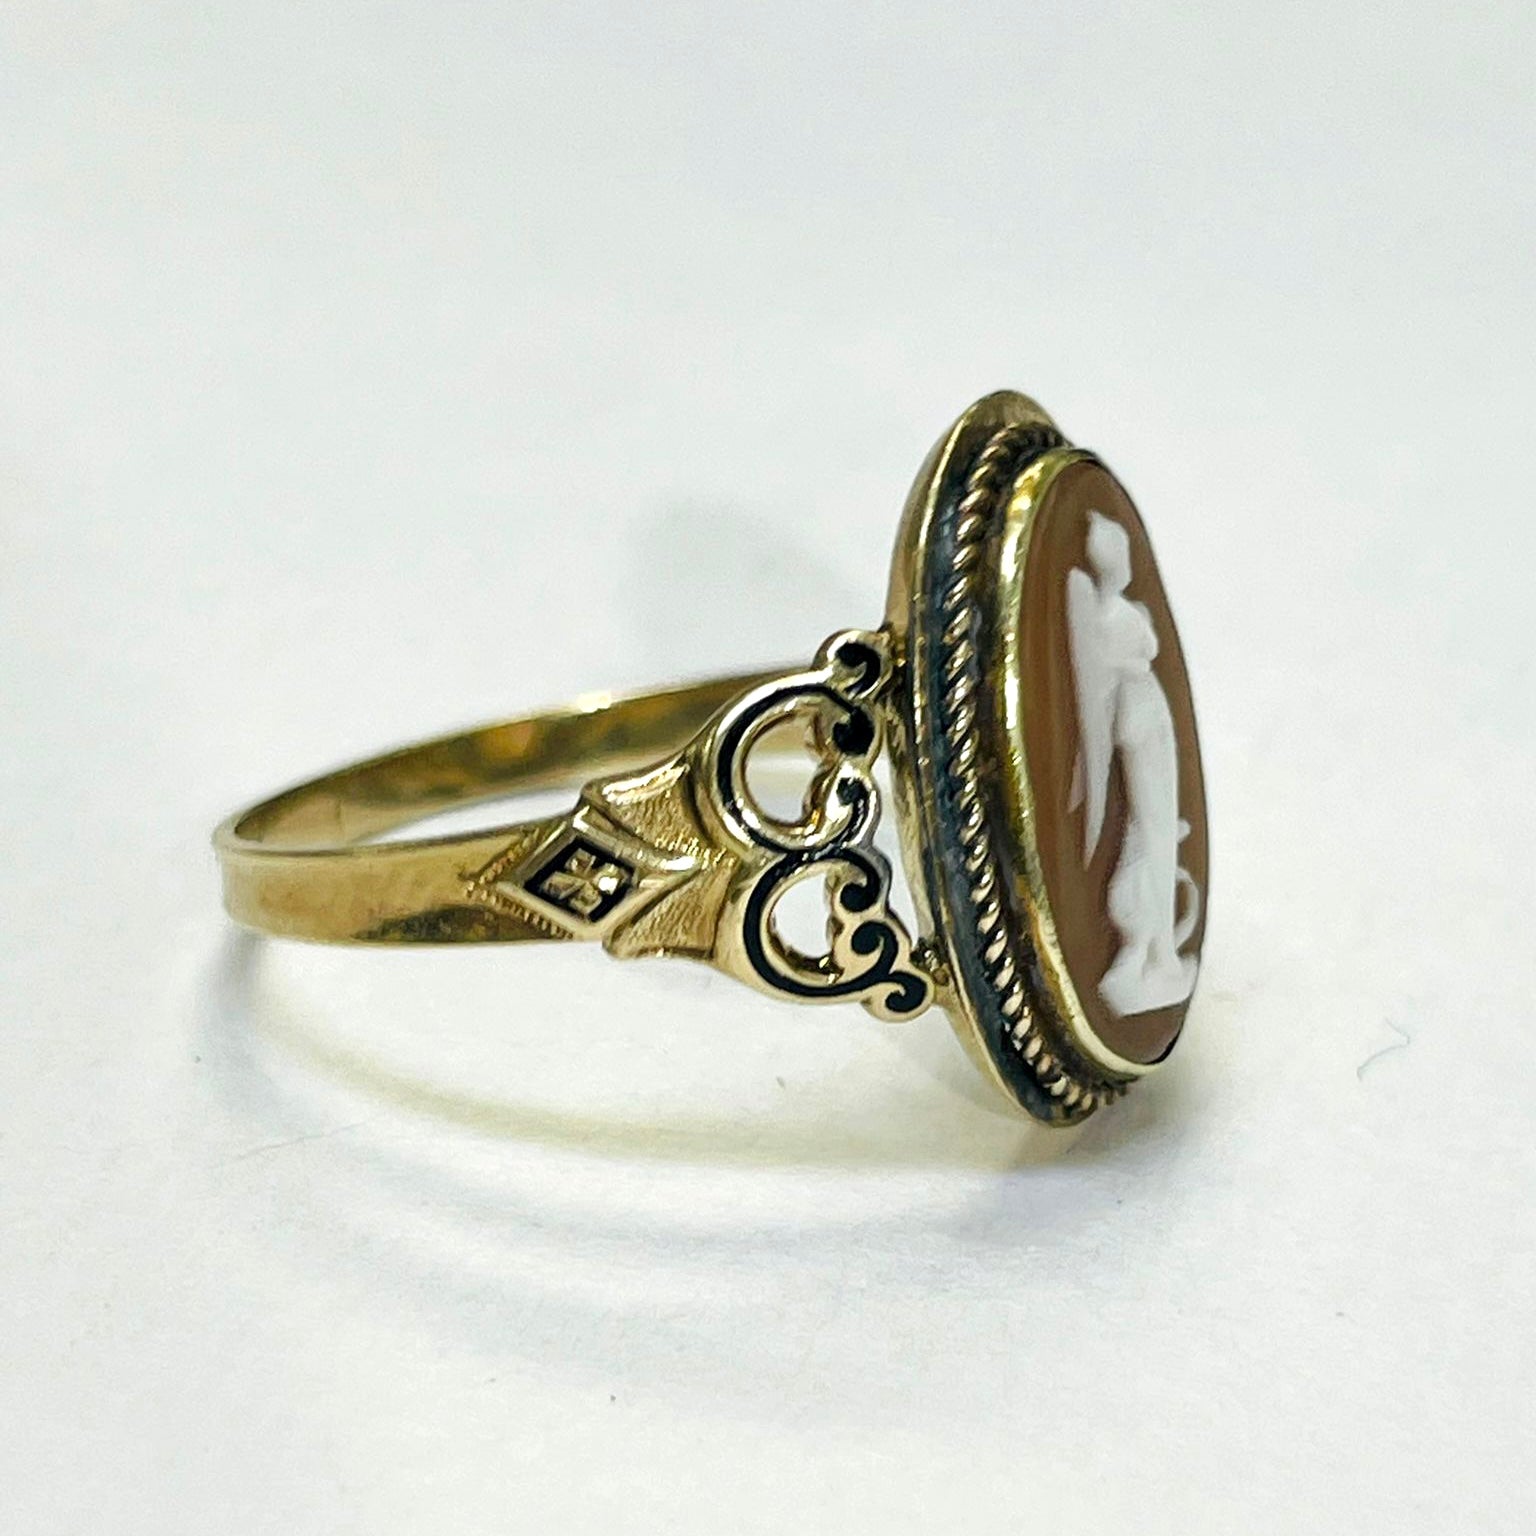 Antique Cameo Ring 18K Size 8.5